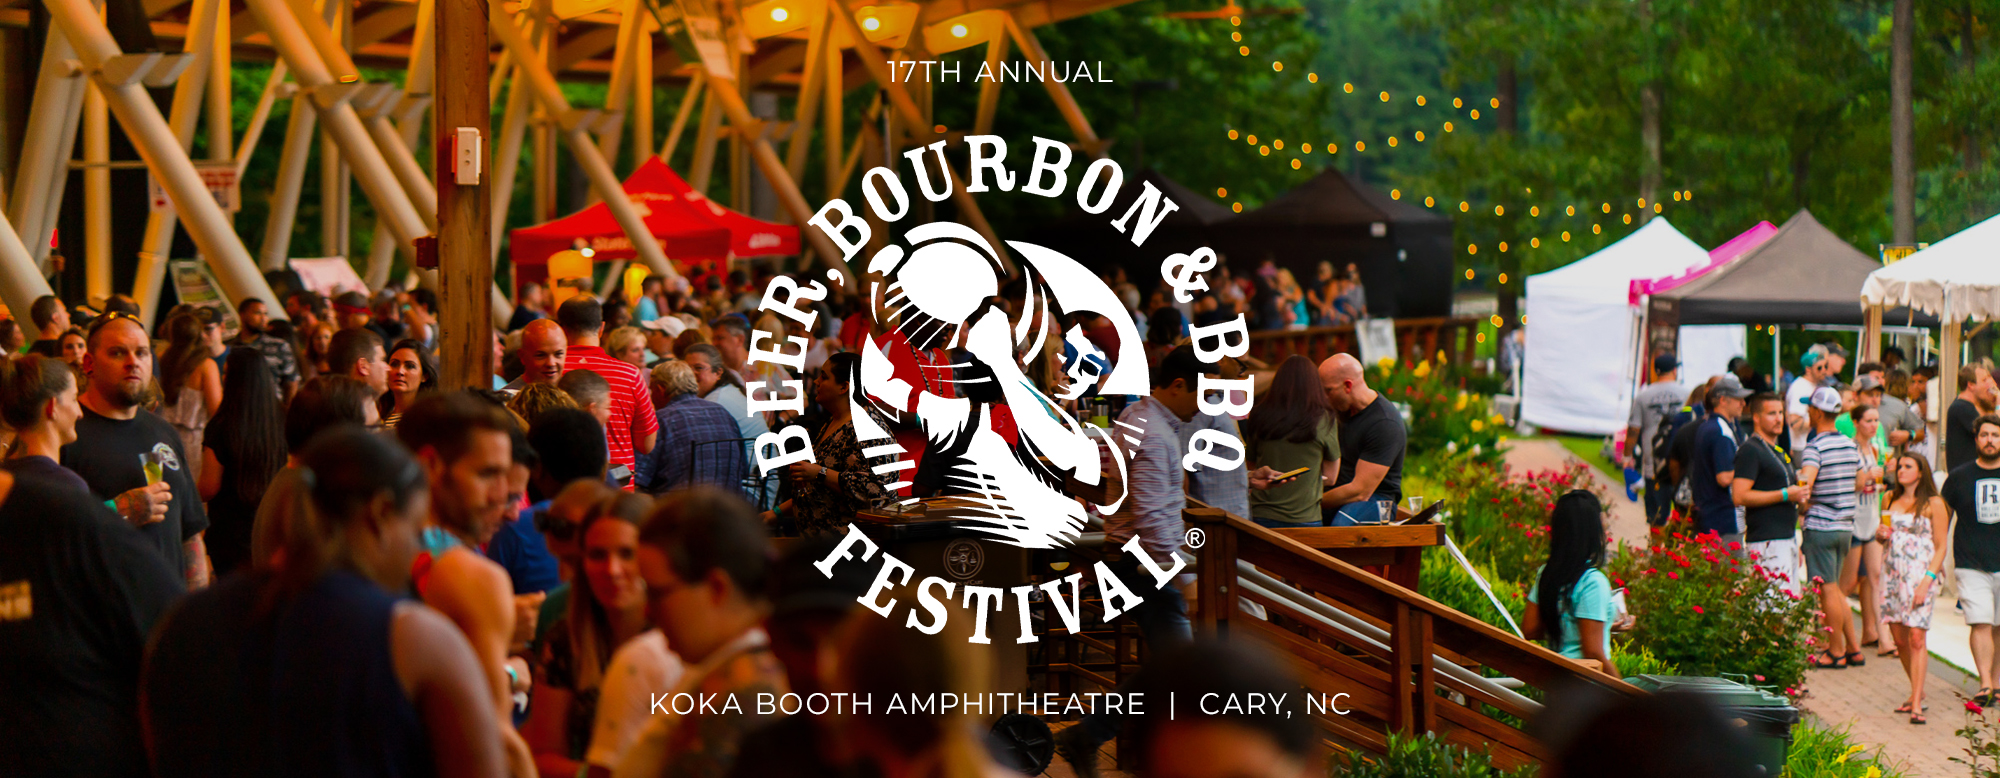 Beer, Bourbon and BBQ Festival: Cary banner image